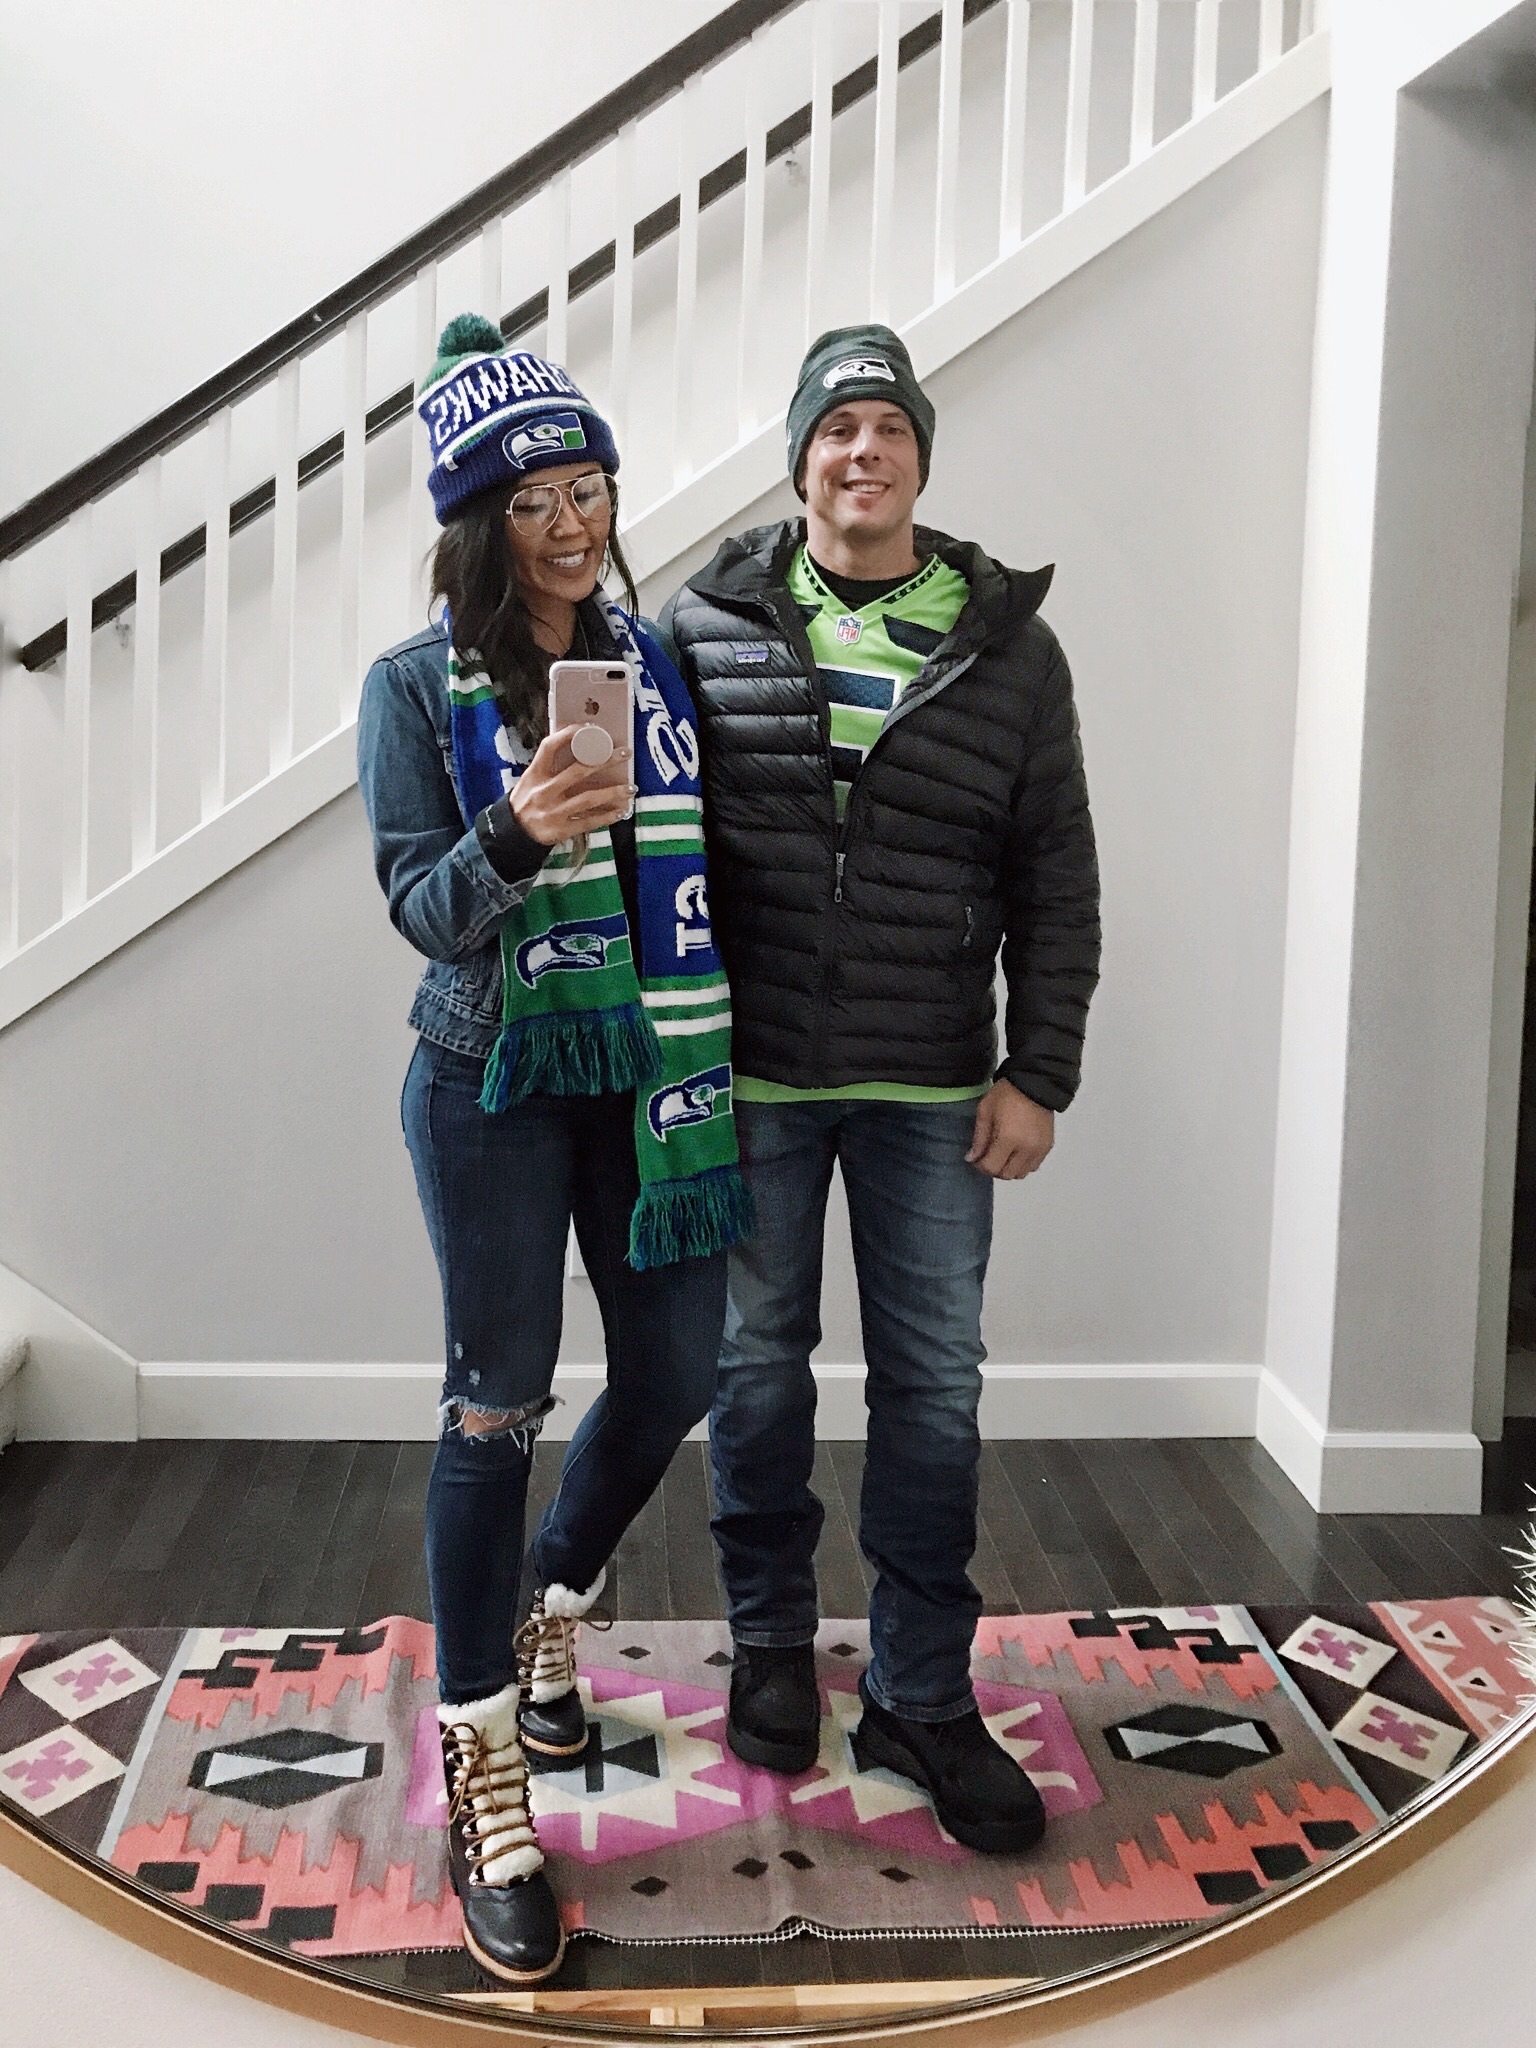 7 Pro Tips For Attending Your First Seahawks Game at CenturyLink Field